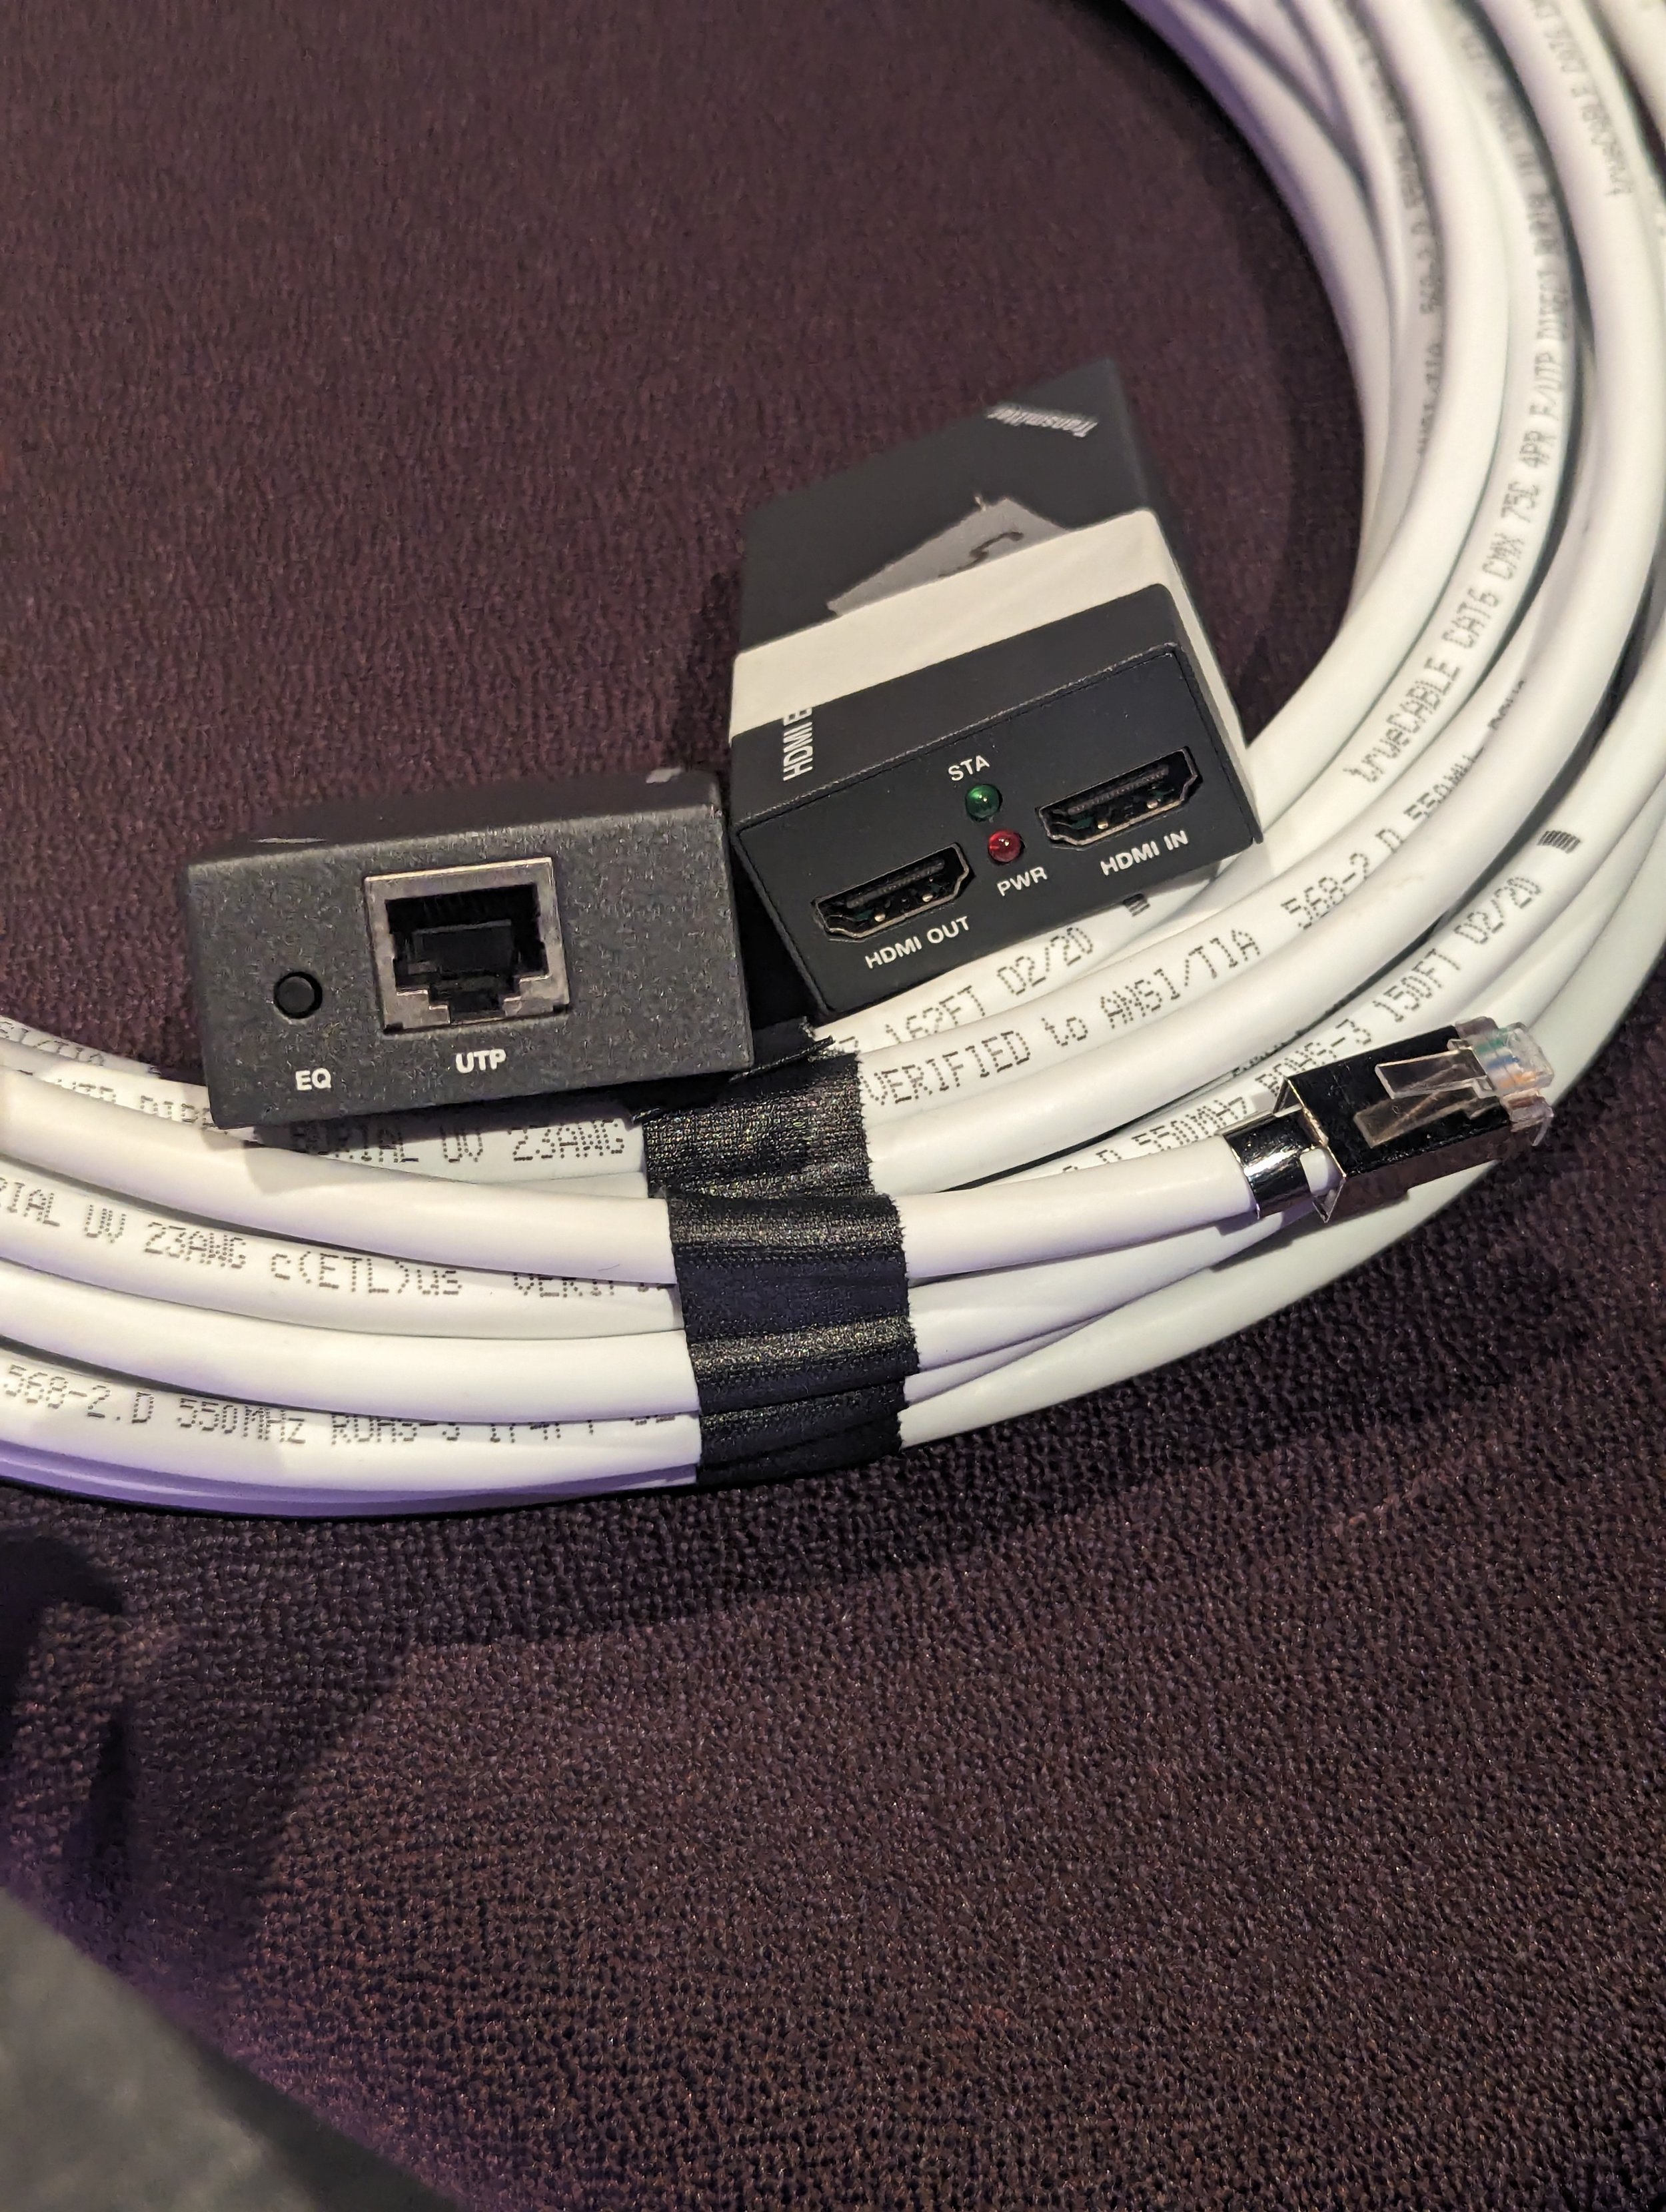 HDMI over RJ45 &lt;$20 w/ shielded Cat6 cable